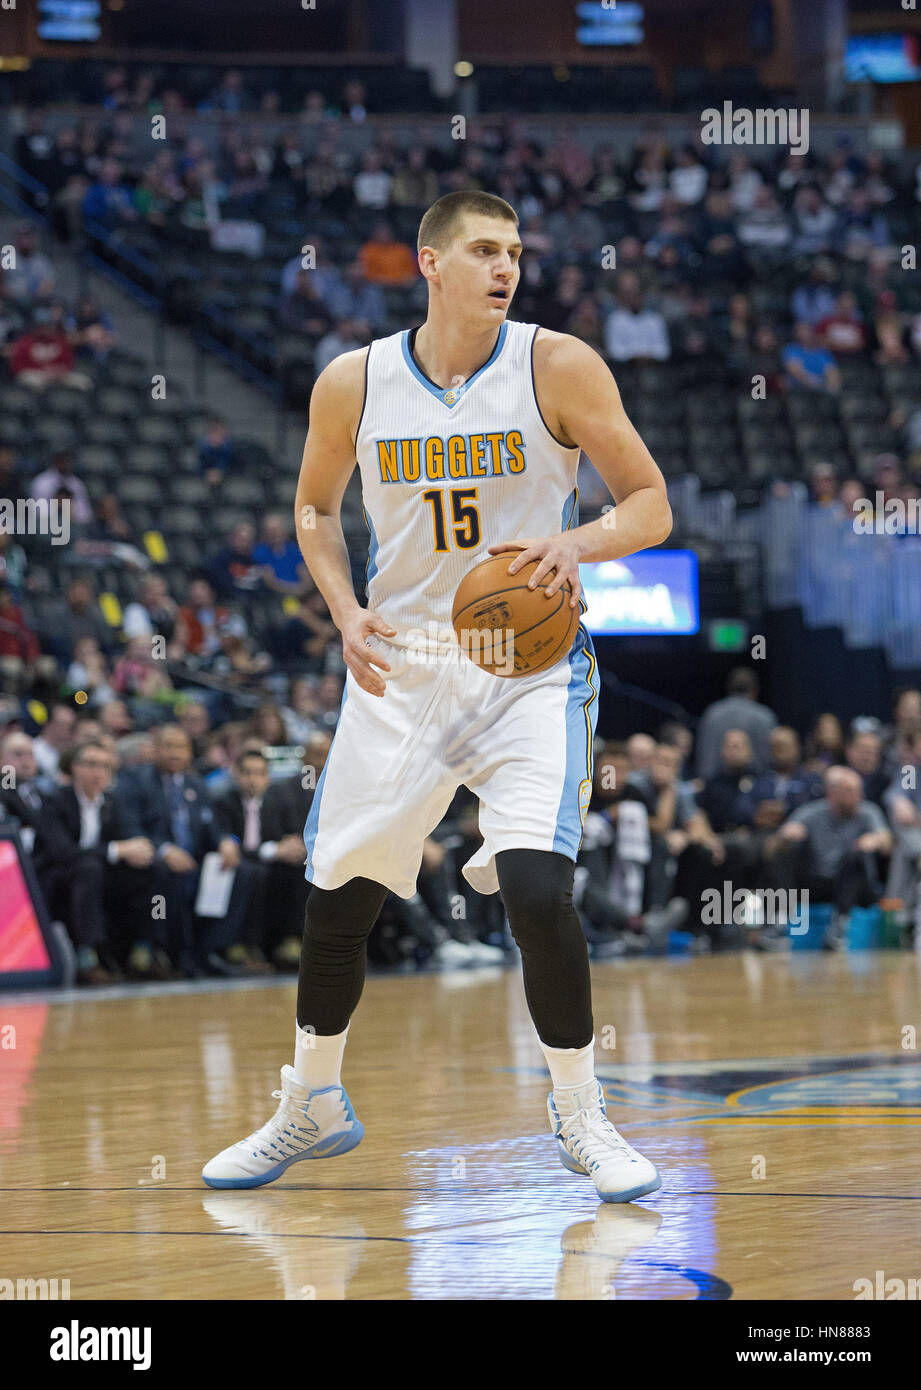 Denver, Colorado, USA. 6th Feb, 2017. Nuggets NIKOLA JOKIC handles the ball at the top of the 3 point line during the 1st. Half at the Pepsi Center Monday night. The Nuggets beat the Mavericks 110-87. Credit: Hector Acevedo/ZUMA Wire/Alamy Live News Stock Photo